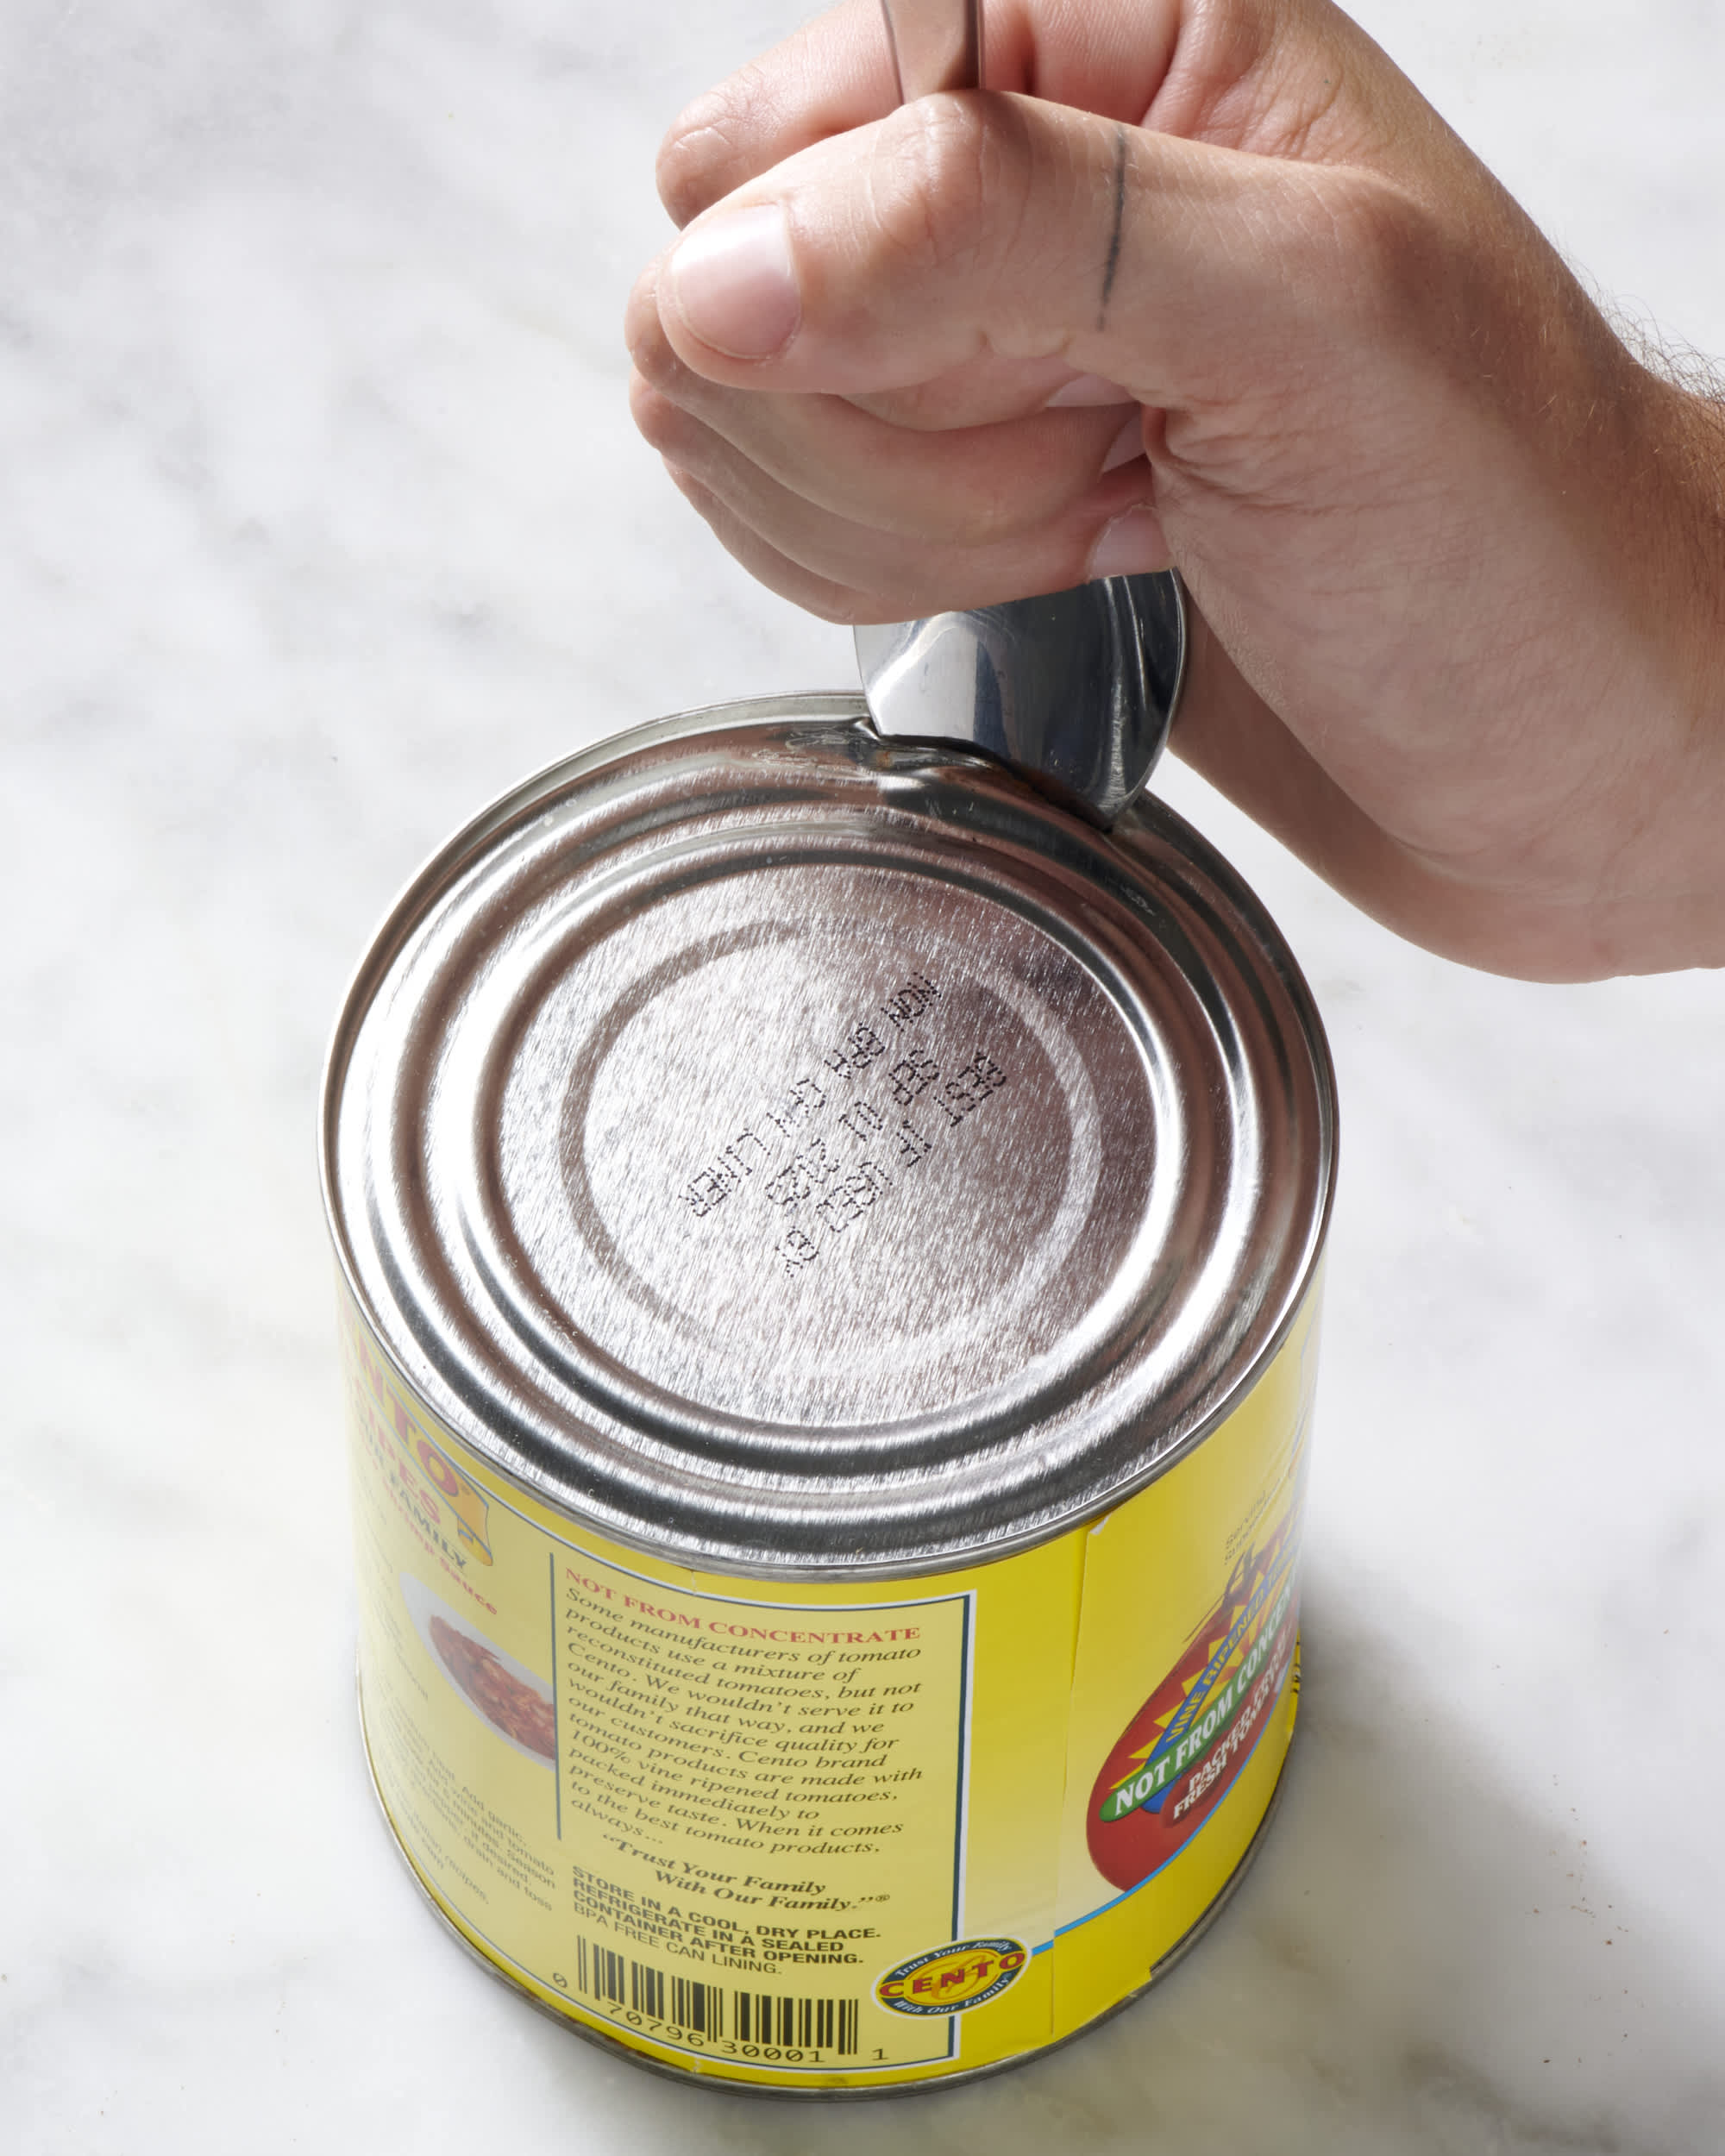 https://cdn.apartmenttherapy.info/image/upload/v1694456198/k/Photo/Series/2023-09-how-to-open-a-can-without-a-can-opener/how-to-open-a-can-without-a-can-opener-001.jpg